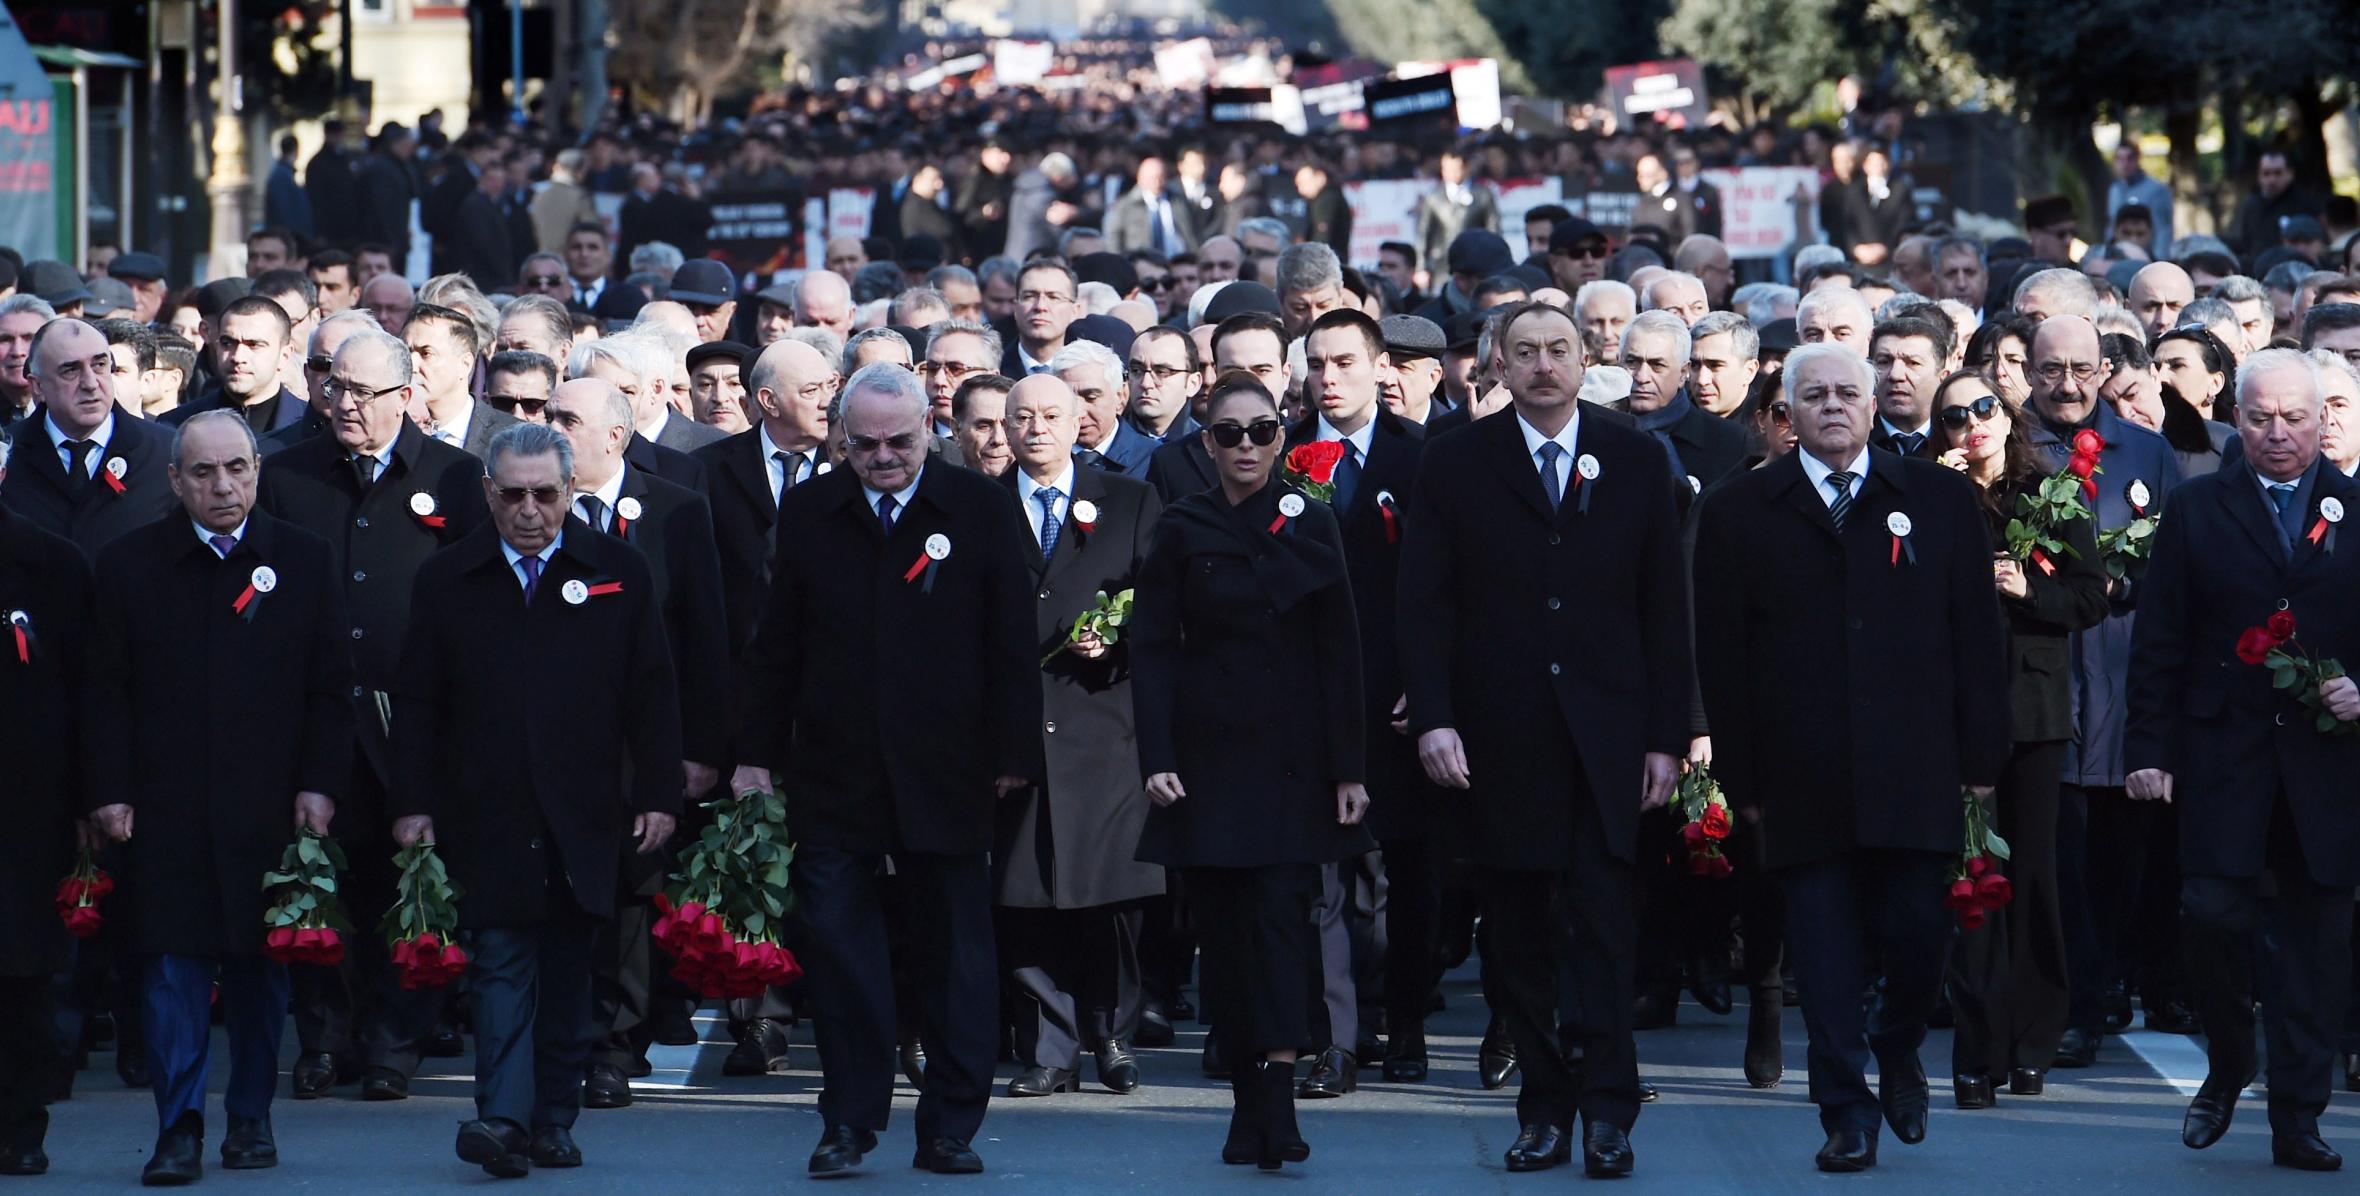 Ilham Aliyev attended the Nationwide march to commemorate 25th anniversary of Khojaly genocide held in Baku